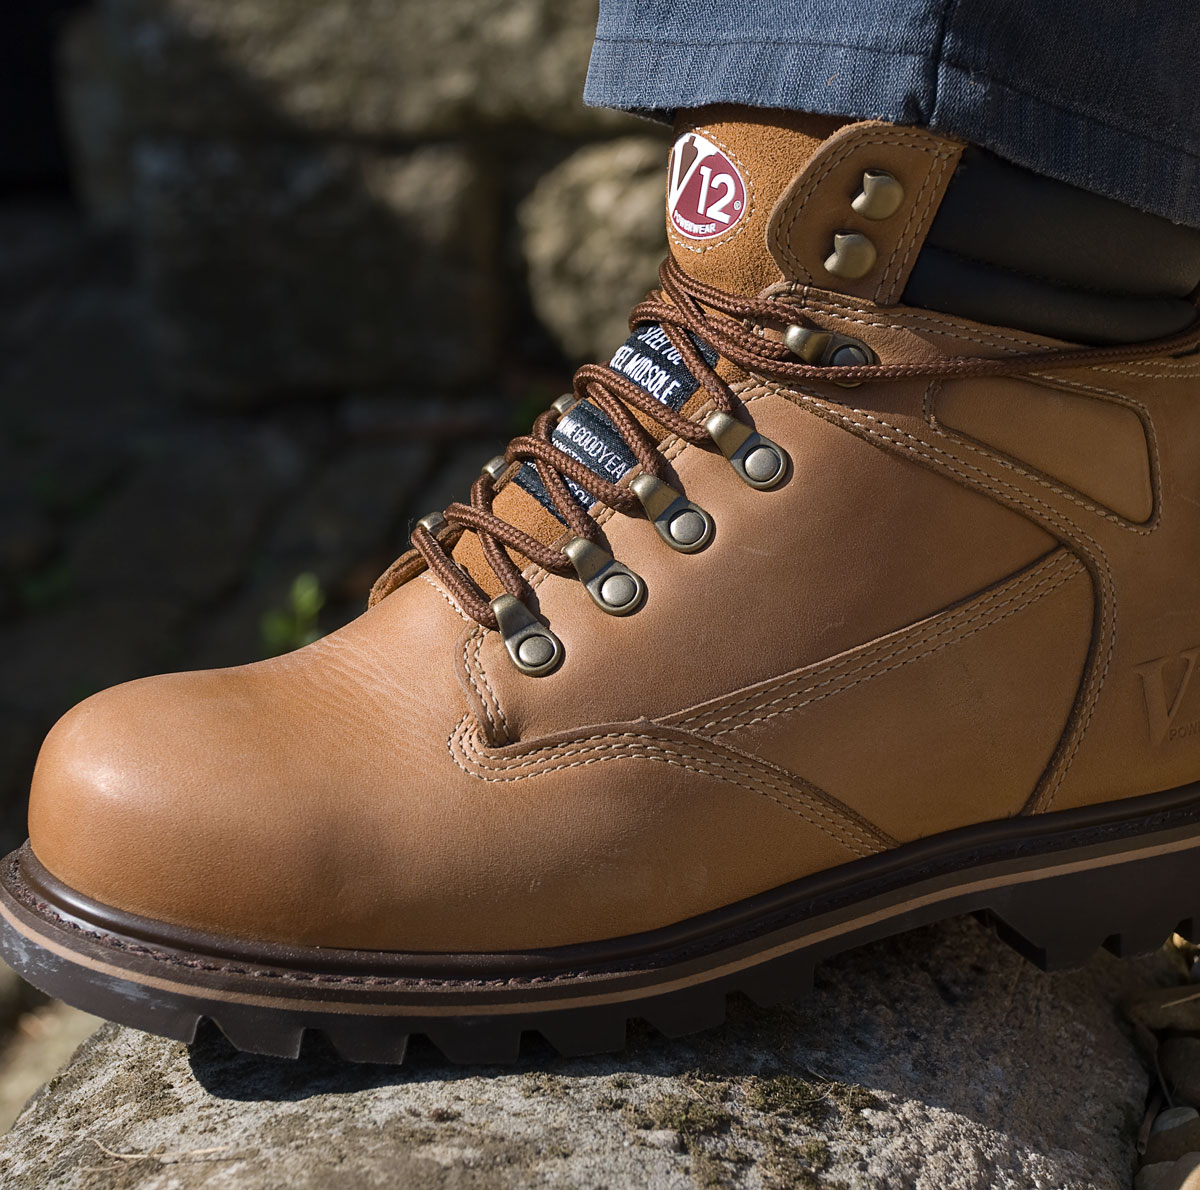 Buy > s1 safety shoes meaning > in stock